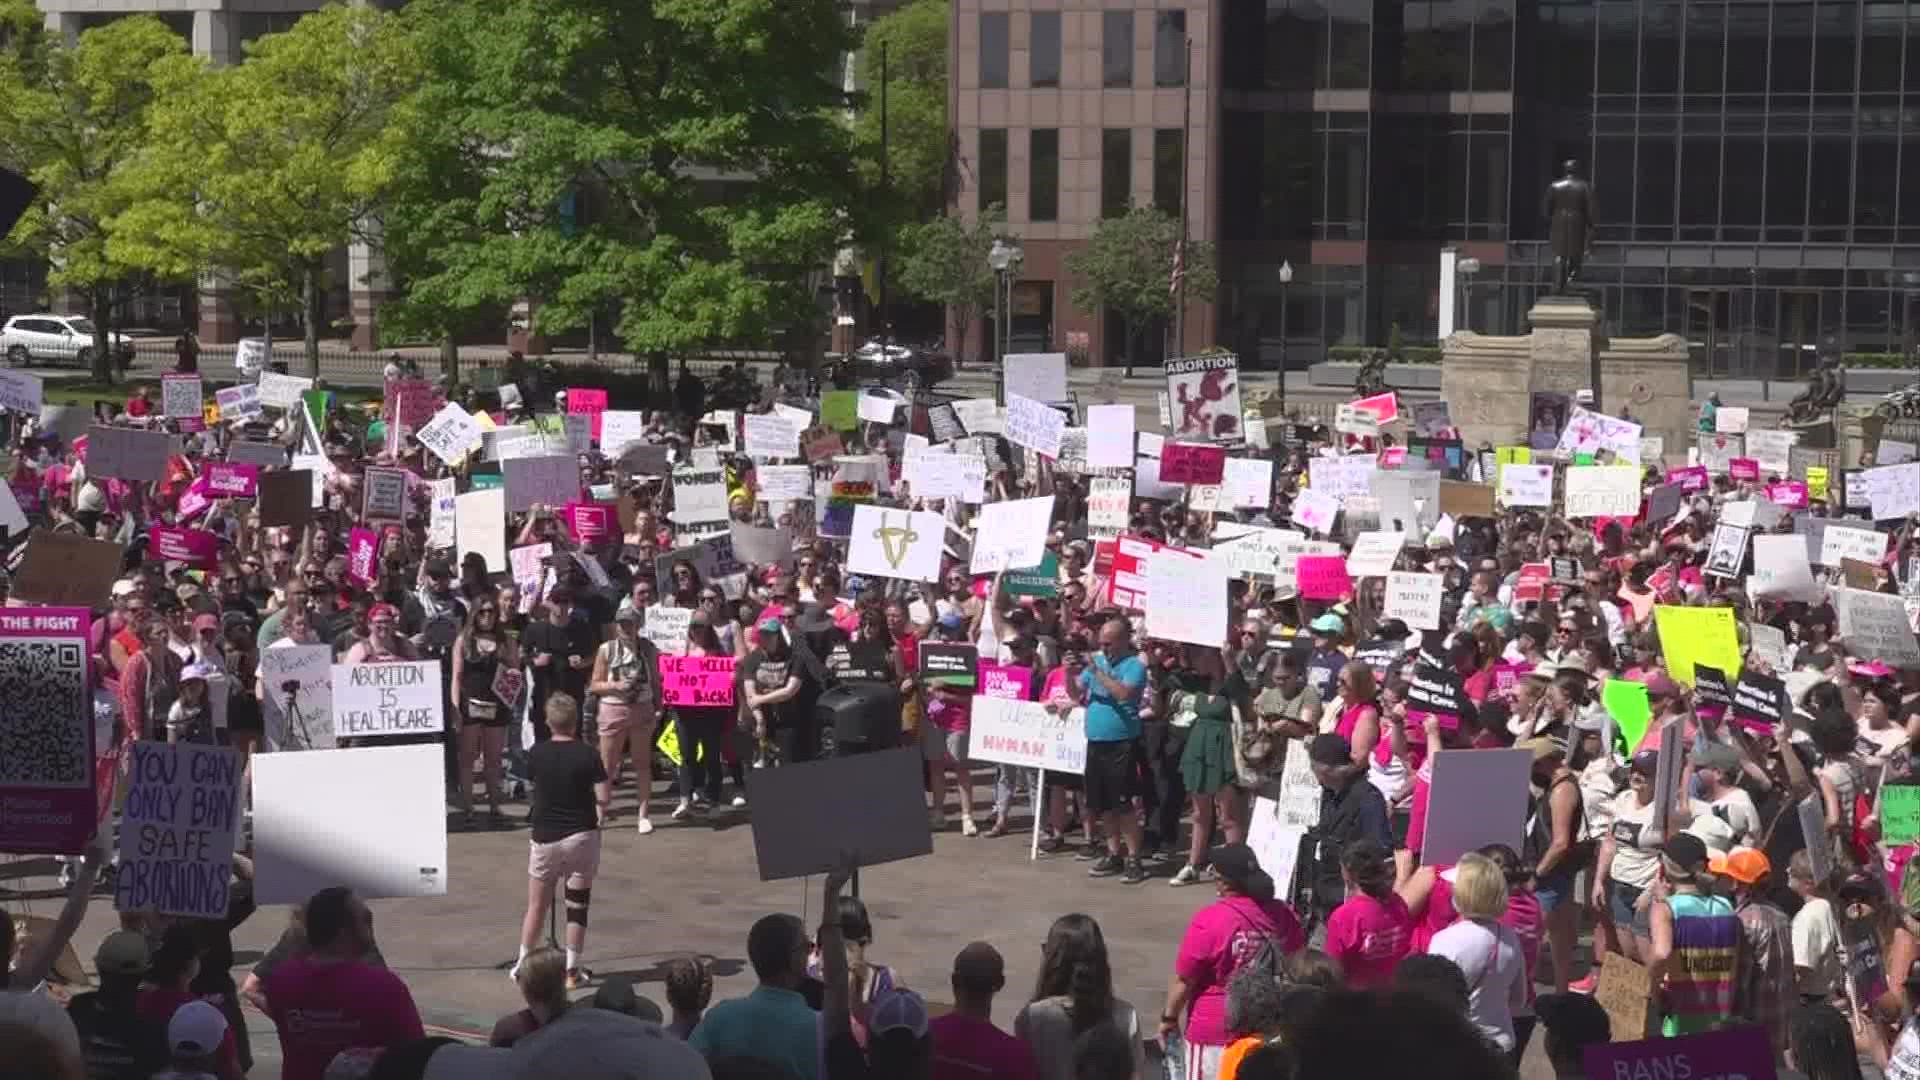 Hundreds of abortion-rights and anti-abortion activists filled the lawn of the Ohio Statehouse Saturday afternoon.